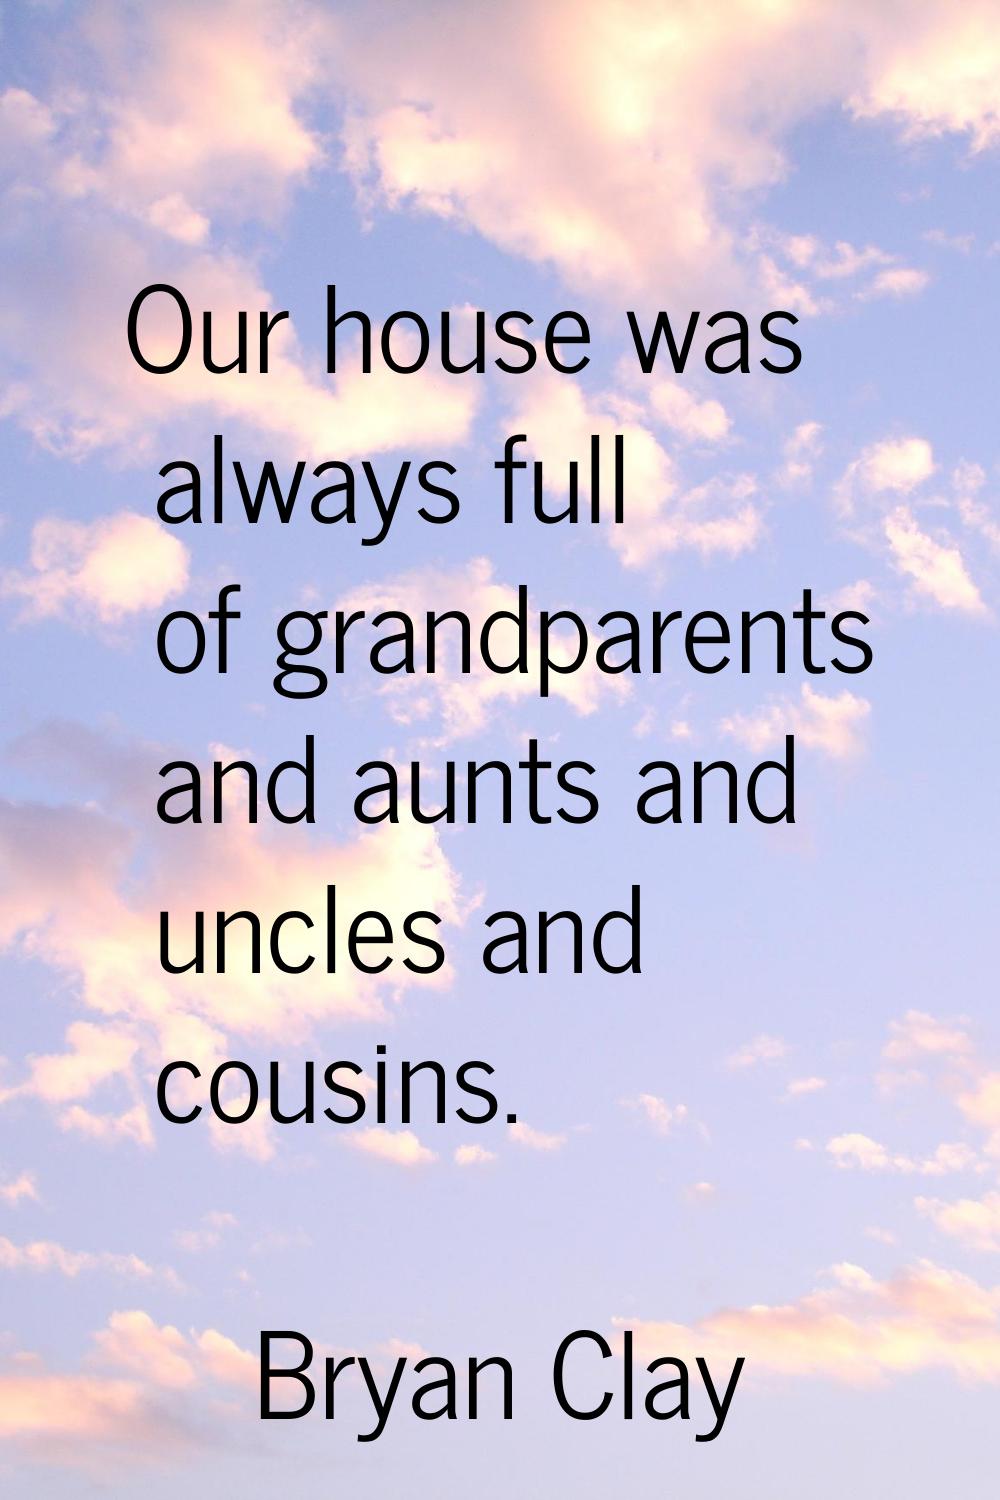 Our house was always full of grandparents and aunts and uncles and cousins.